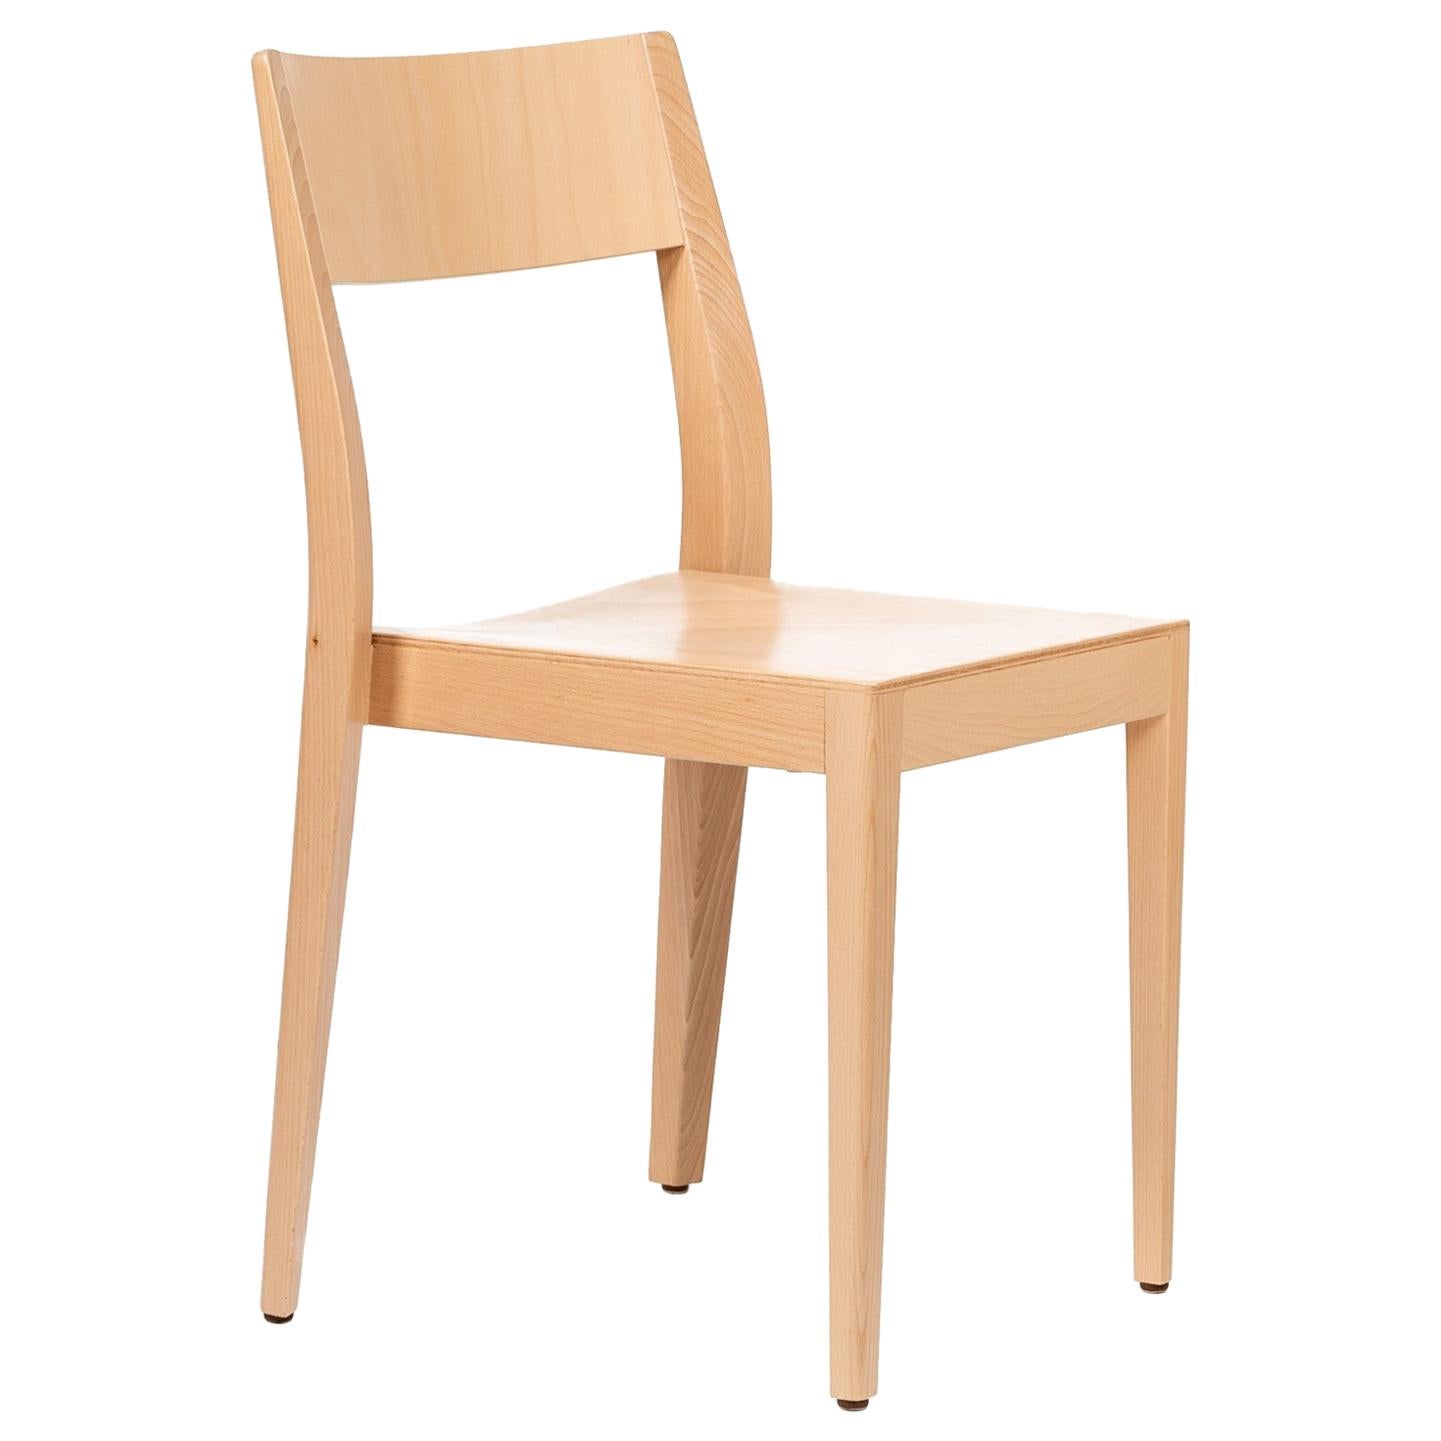 Dietiker Soma Minimalist Dining Chair in Beech Wood Designed by Thomas Albrecht